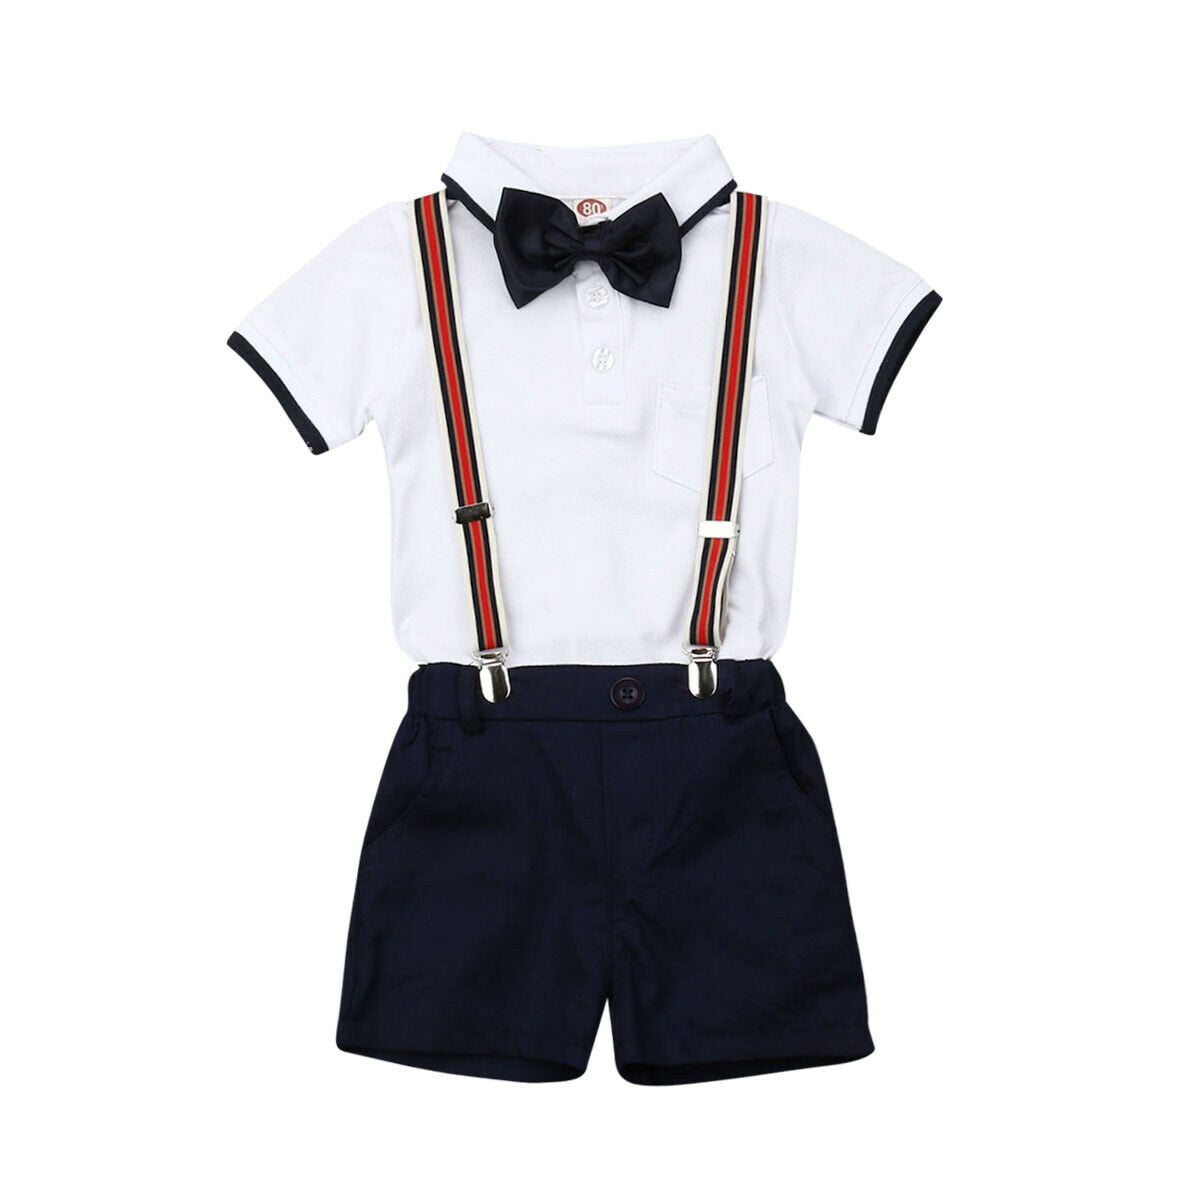 baby boys cotton Tuxedo suit birthday bodysuit outfits & sets party wedding suit